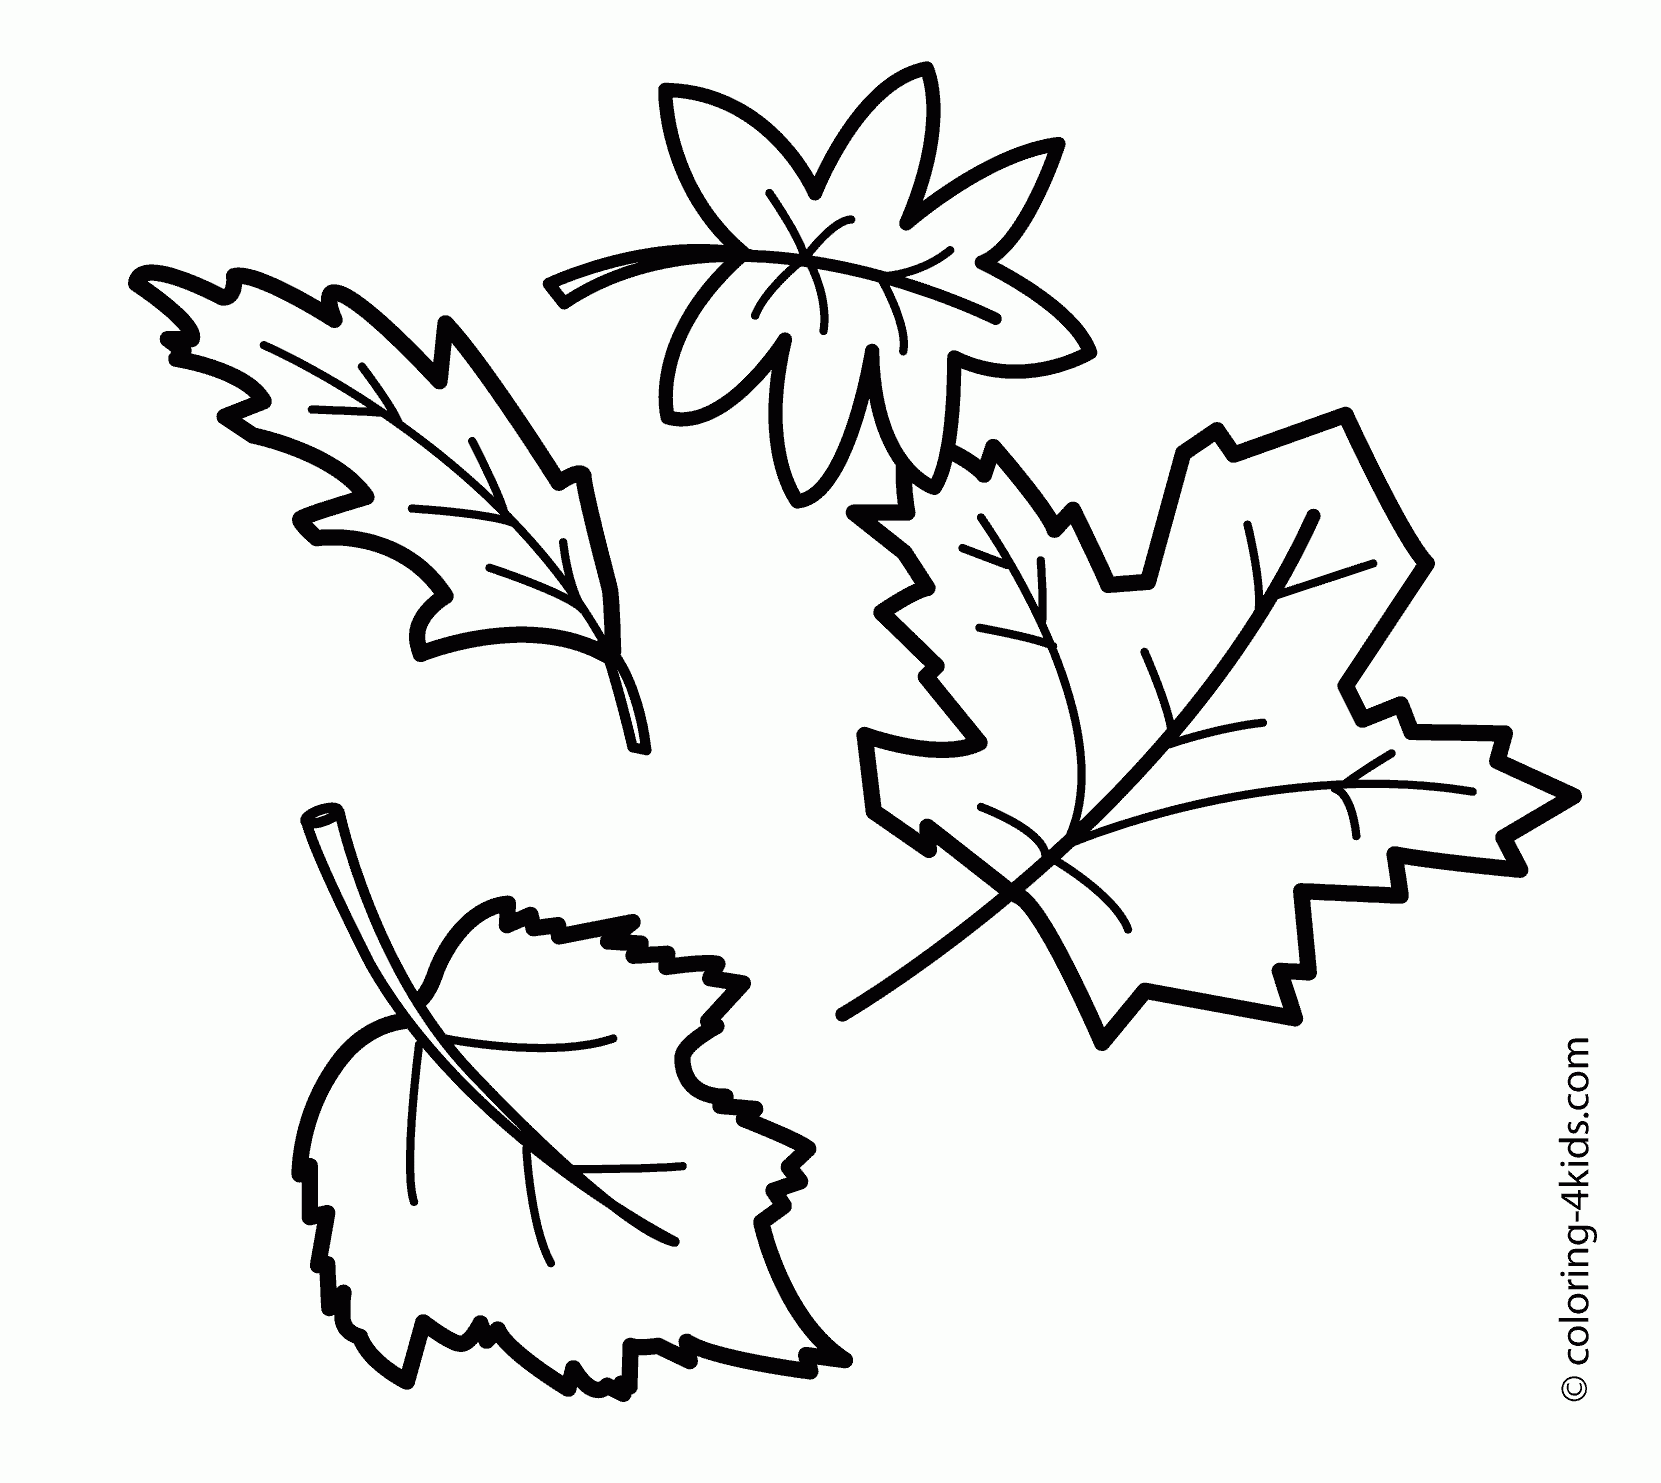 Drawing an autumn leaf - How to draw a leaf - YouTube